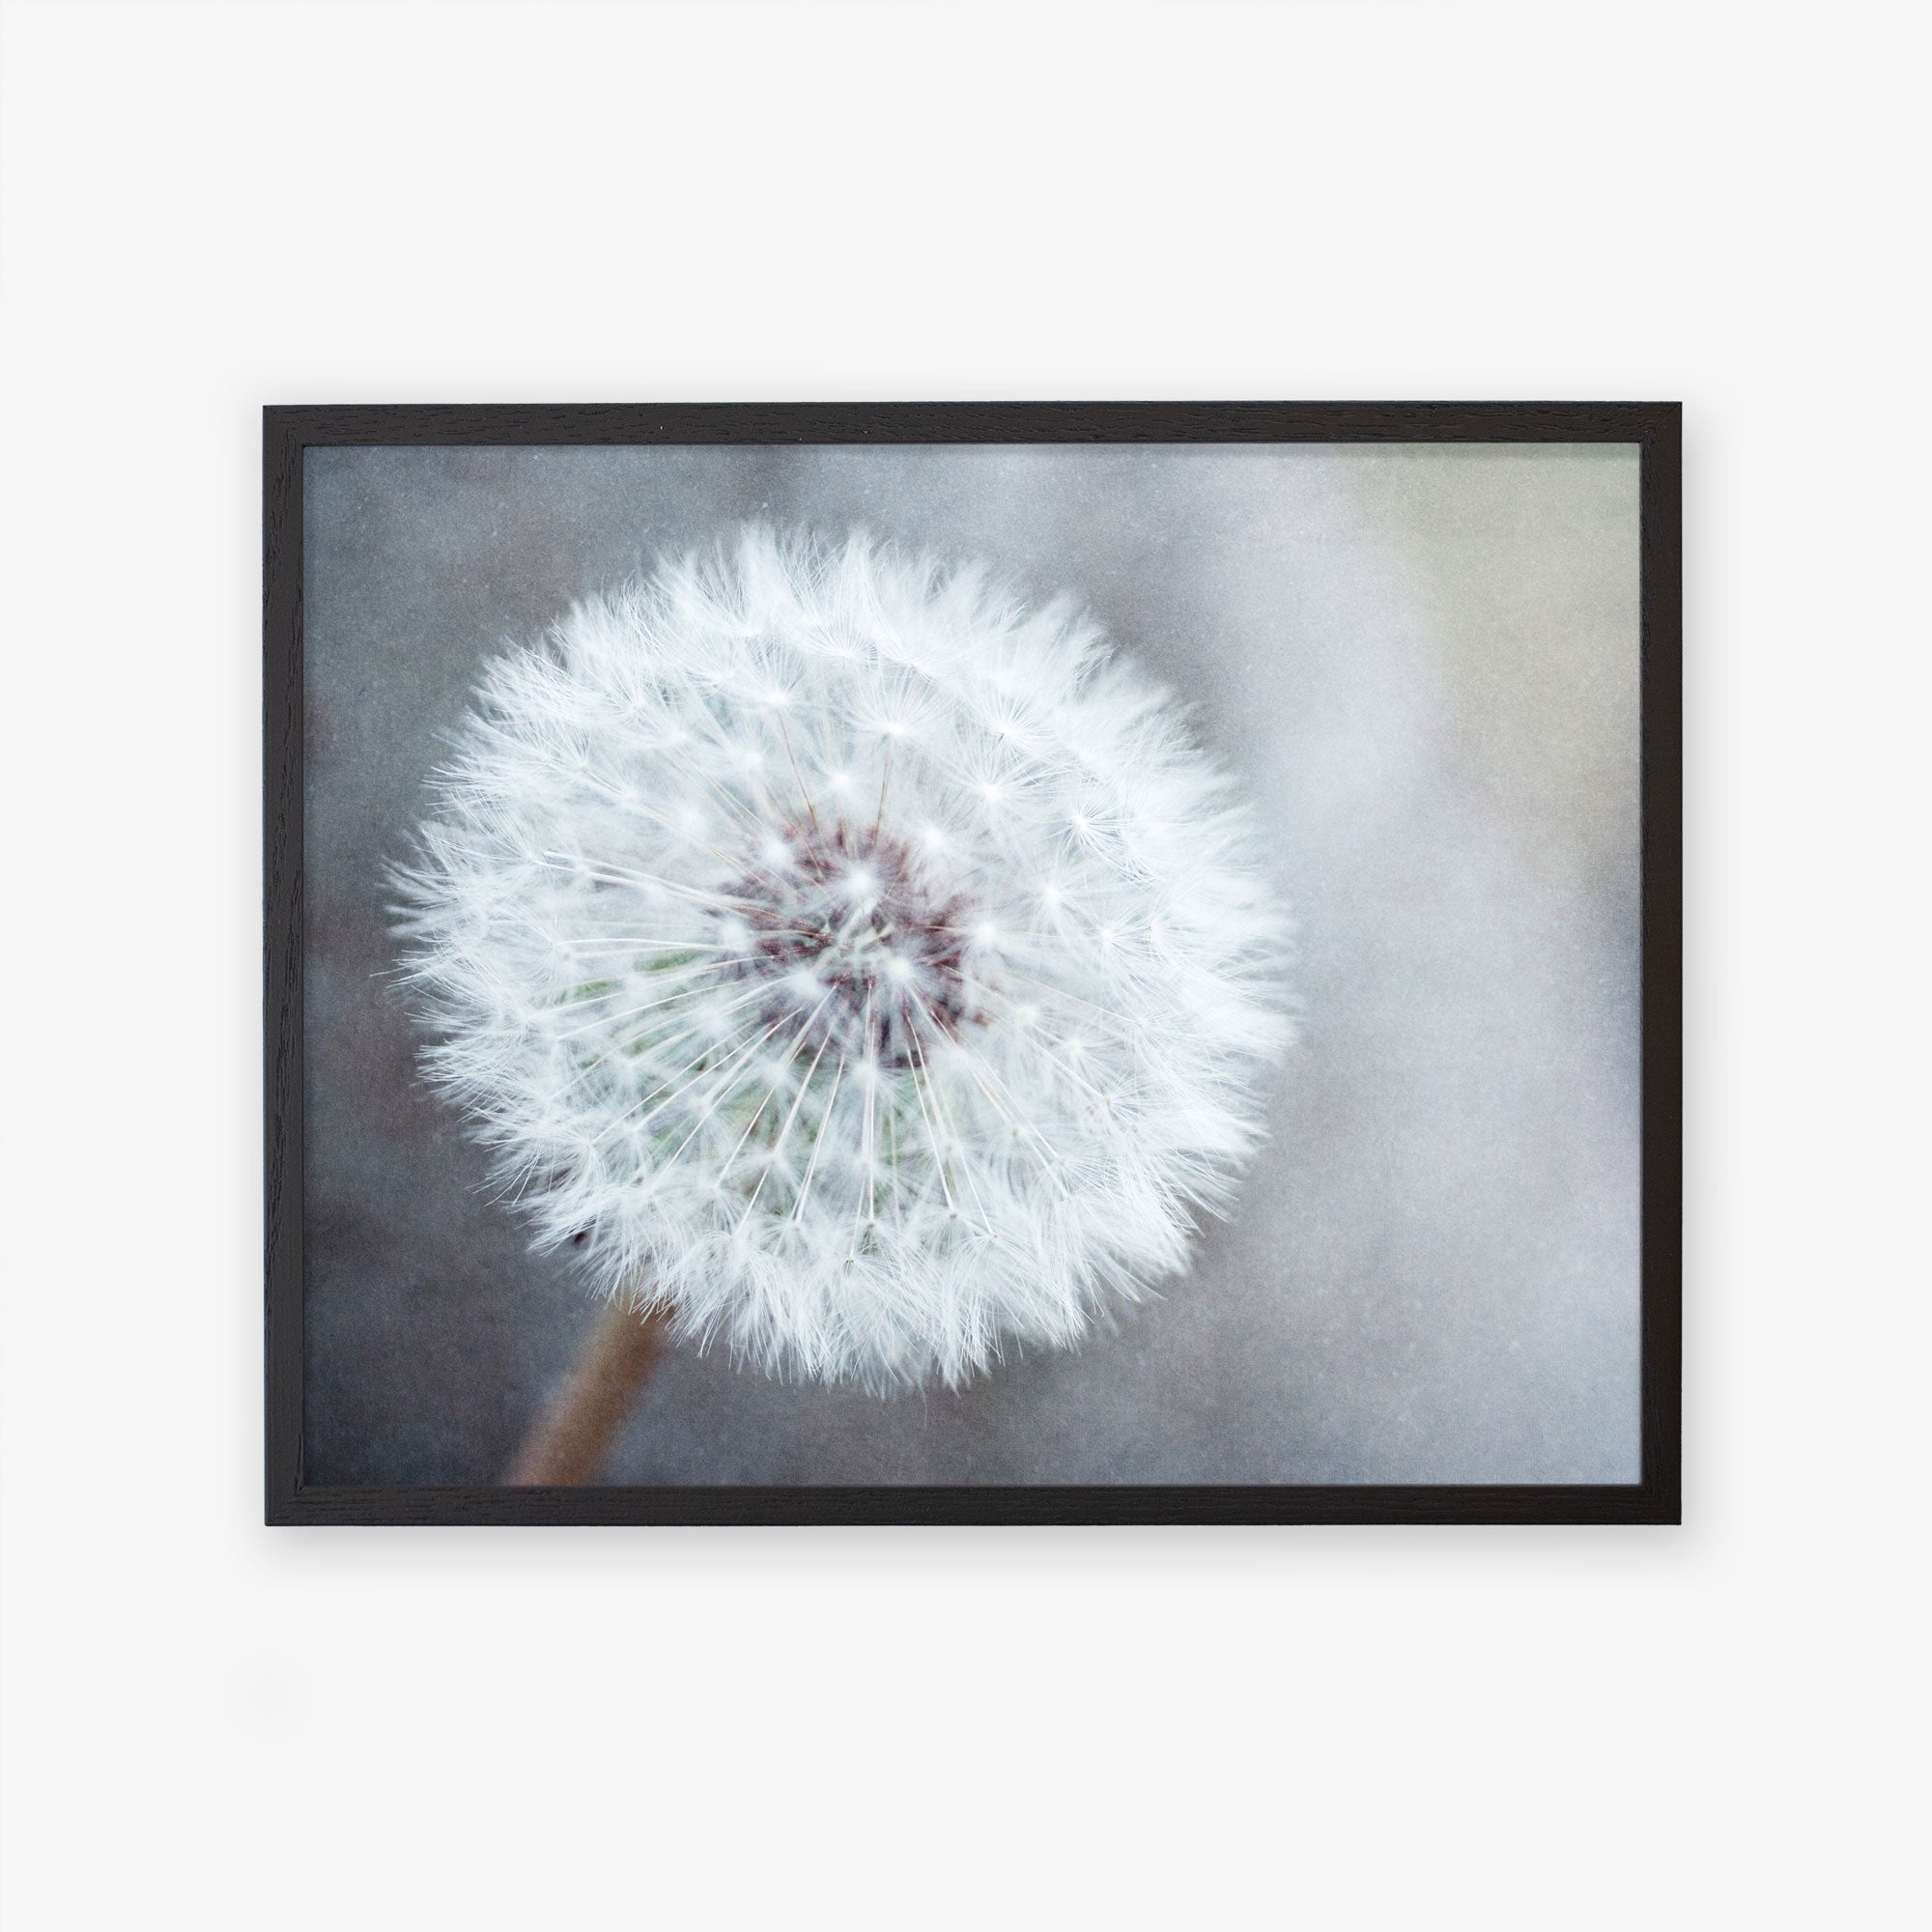 Close-up of a Neutral Grey Floral Print, &#39;Dandelion King&#39; by Offley Green printed on archival photographic paper in a black frame against a blurred background, showcasing its delicate white filaments and seeds.